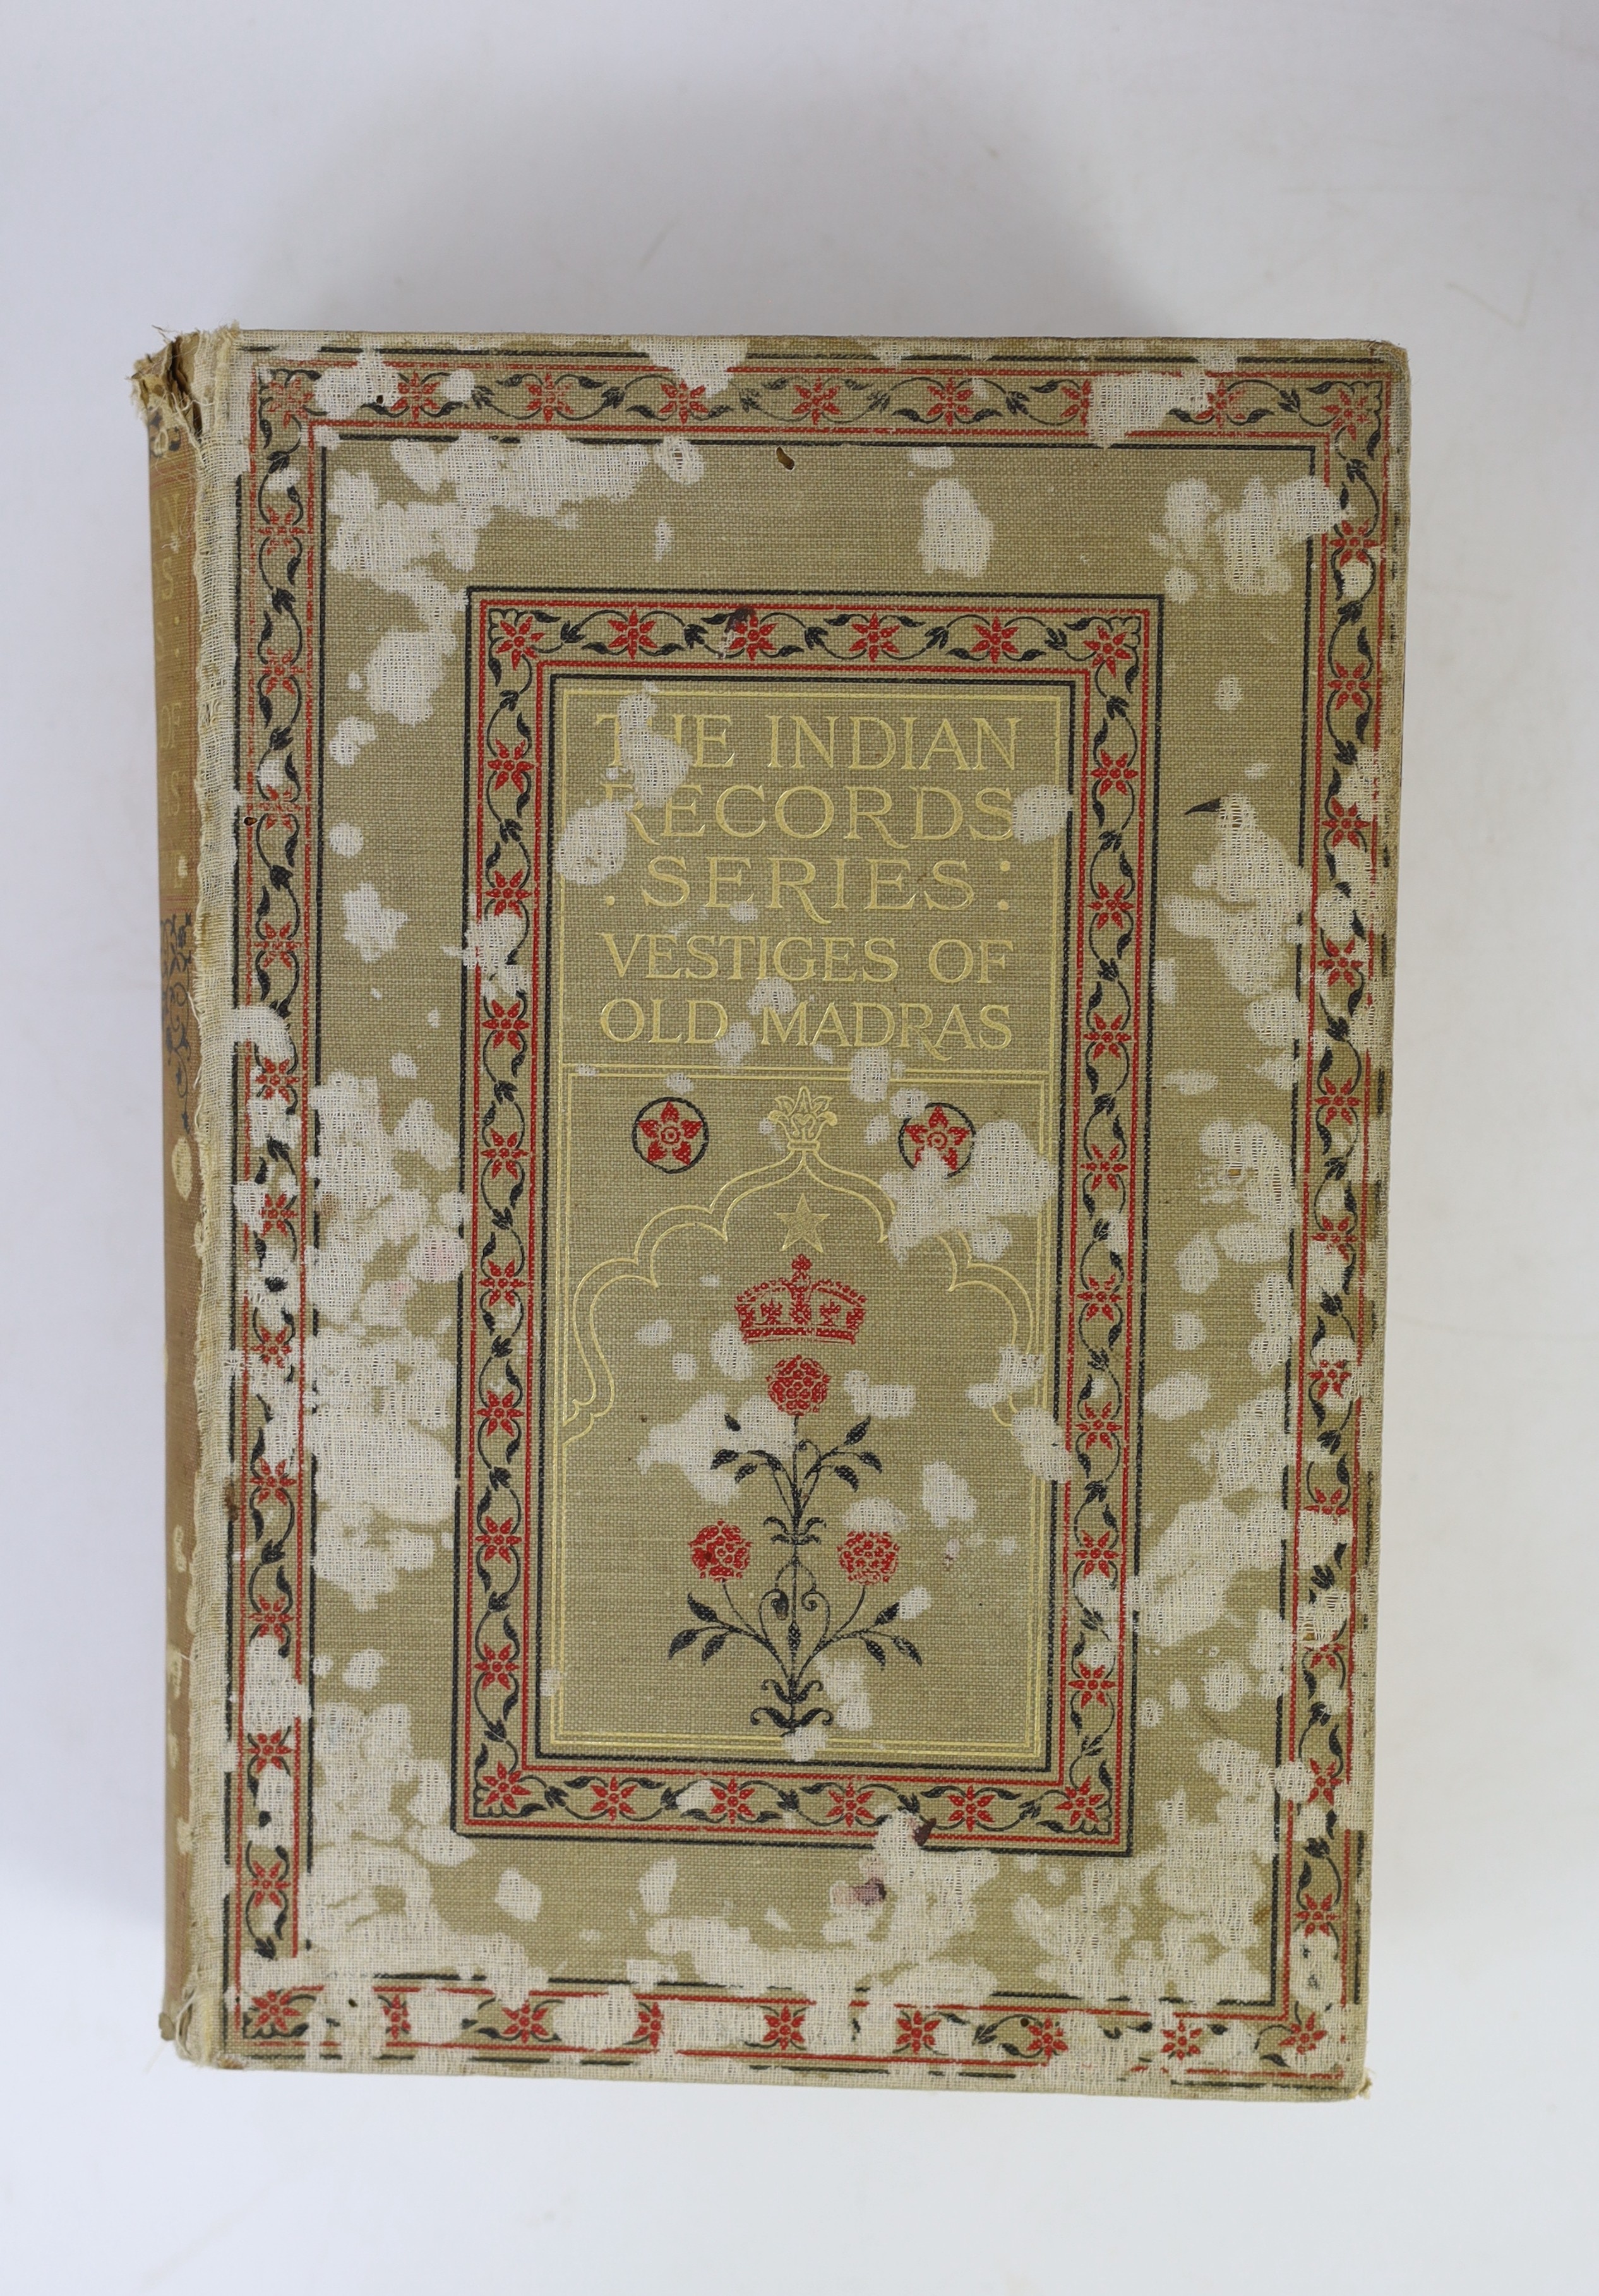 Love, Henry Davison - Indian Record Series: Vestiges of Old Madras 1640-1800, 4 vols, including index, with maps and illustrations, 8vo, decorated cloth (vol.1 covers moth eaten), John Murray, London, 1913